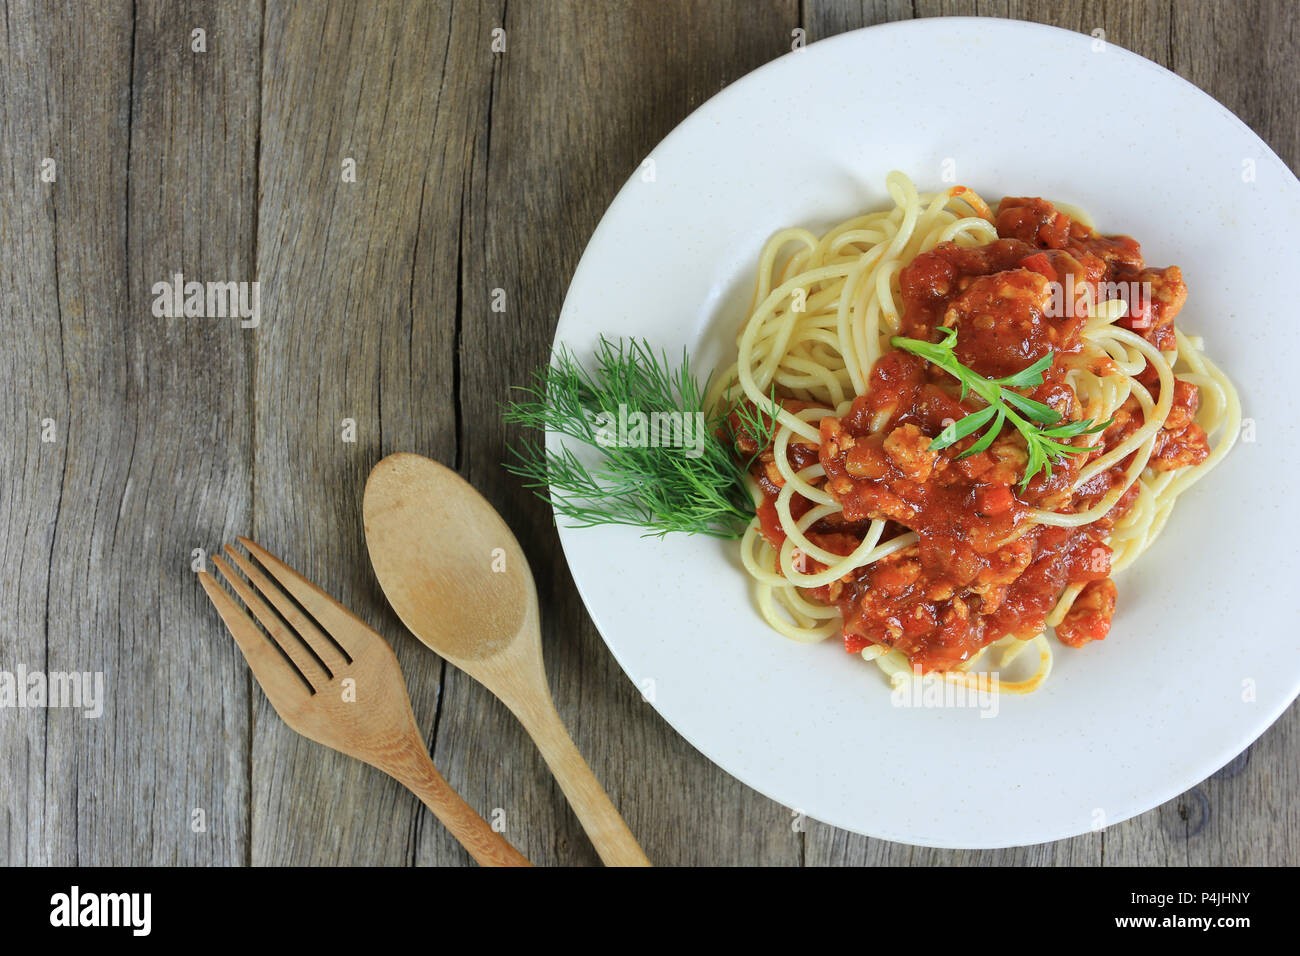 Spaghetti with tomato sauce in a white dish on wooden floor background and have copy space in concept of eating good food is health care. Stock Photo